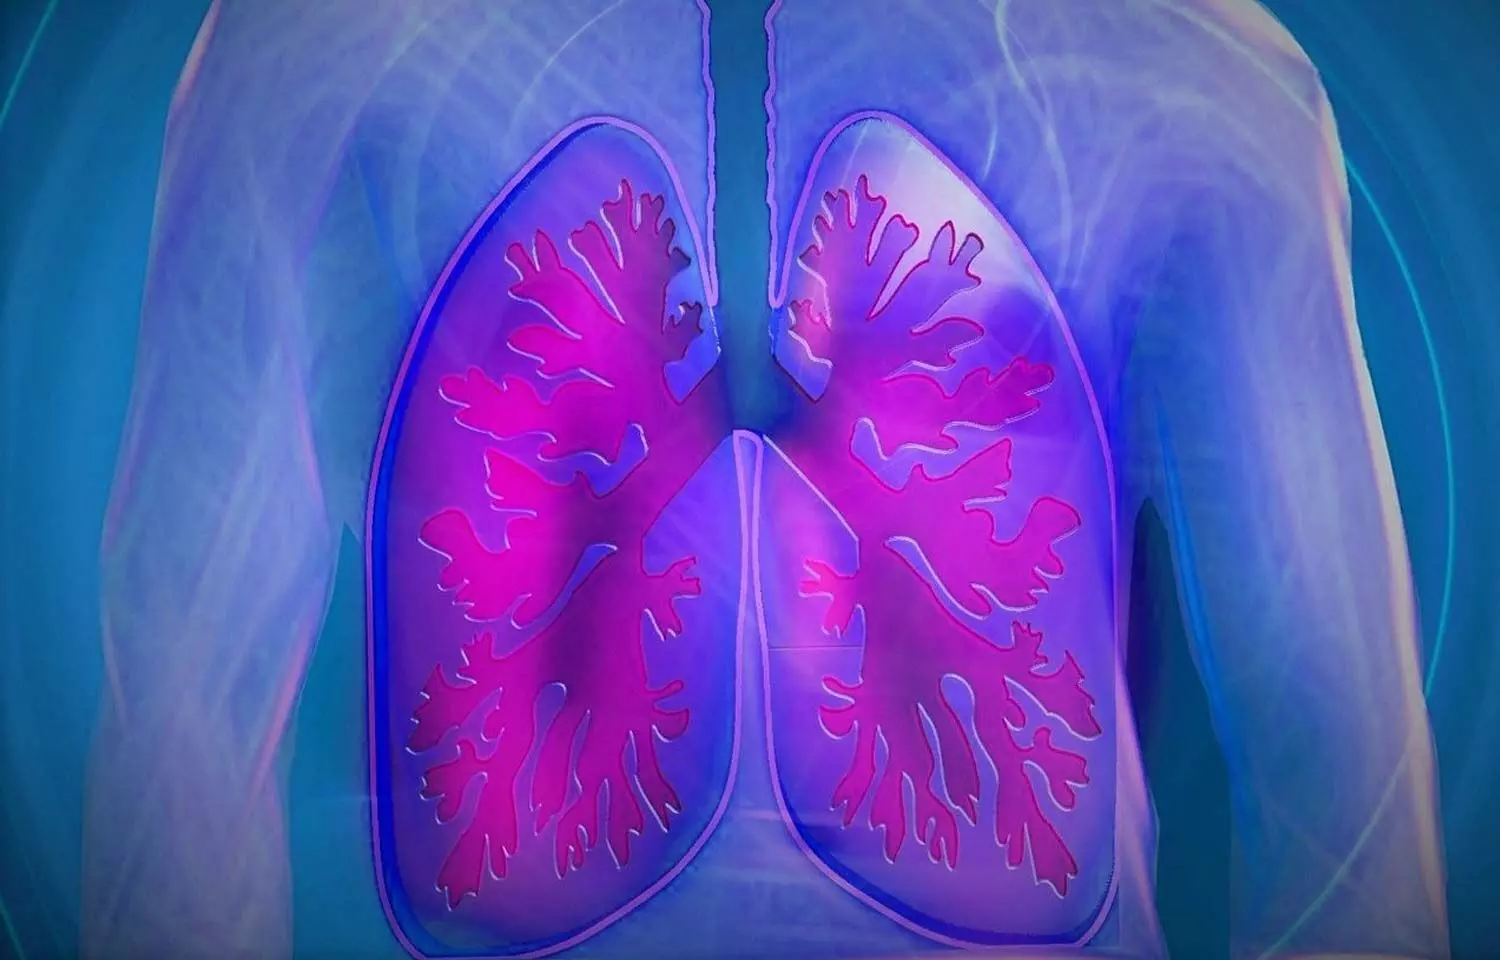 Fibrotic Lung abnormalities persist even after 1 year in severe COVID-19 survivors: Study